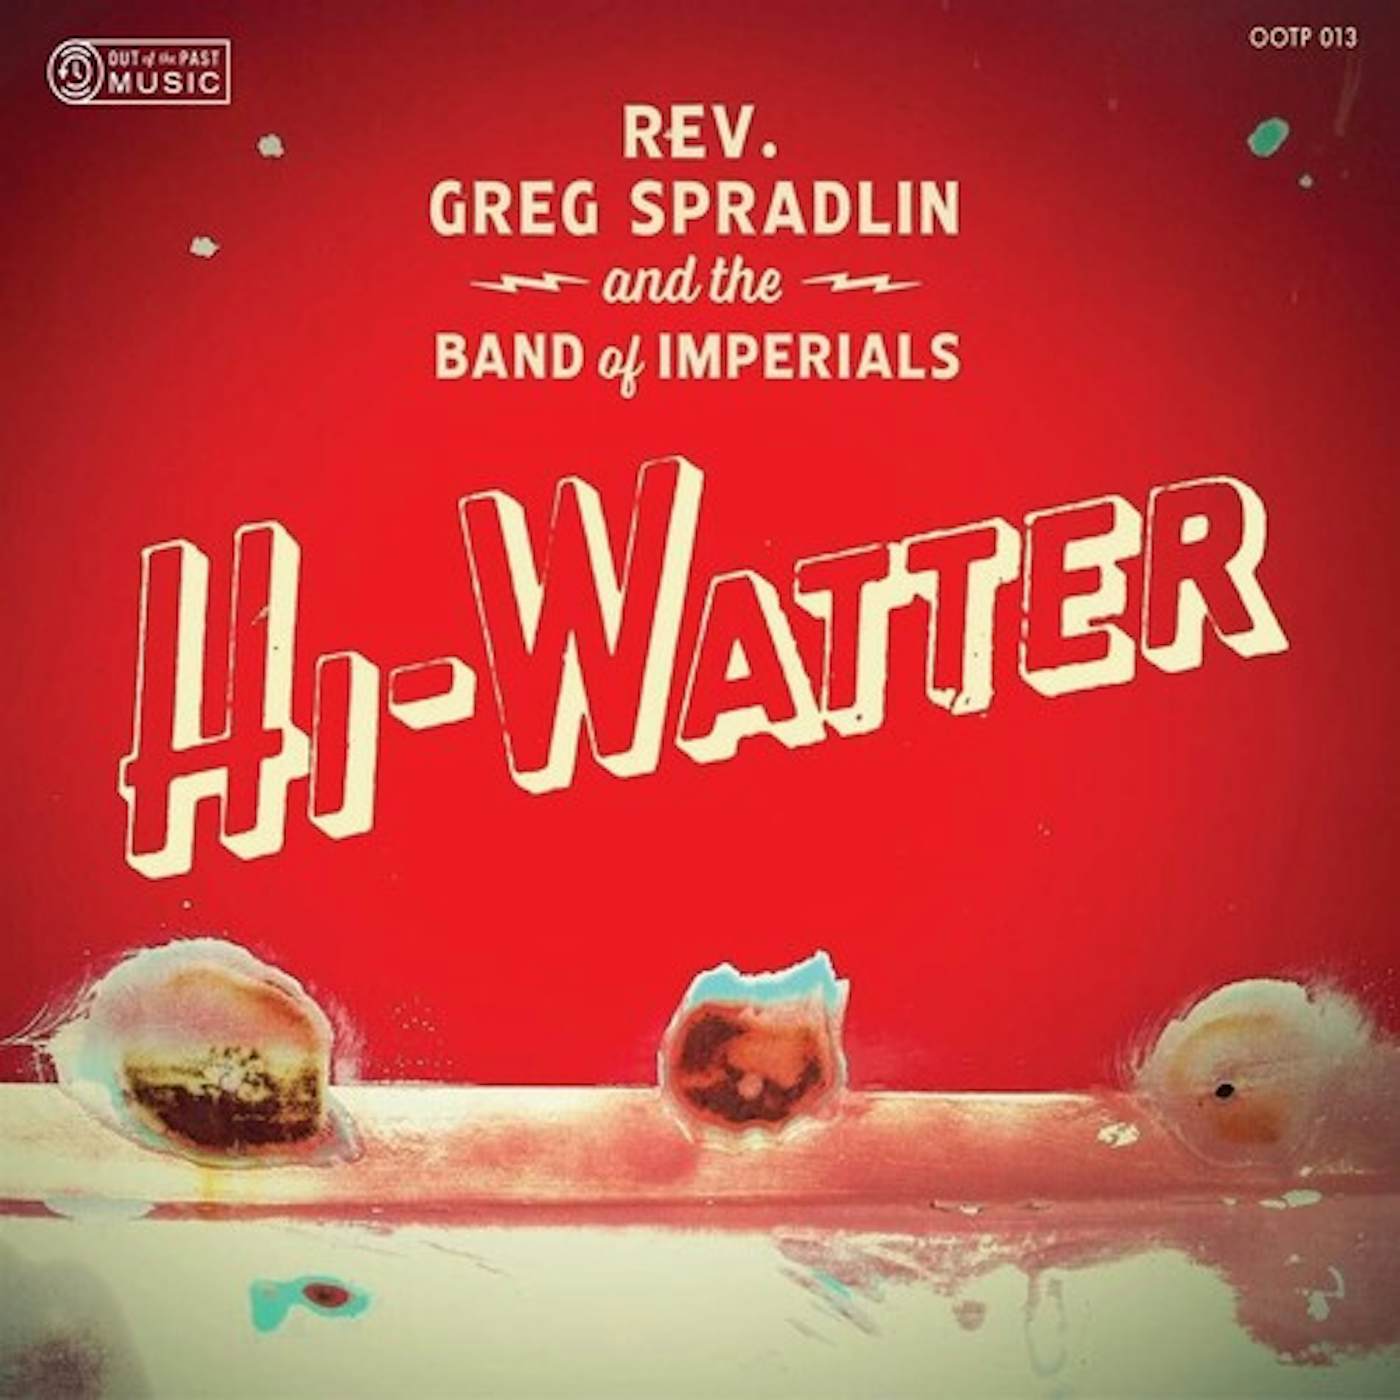 Rev. Greg Spradlin and the Band of Imperials HI-WATTER CD